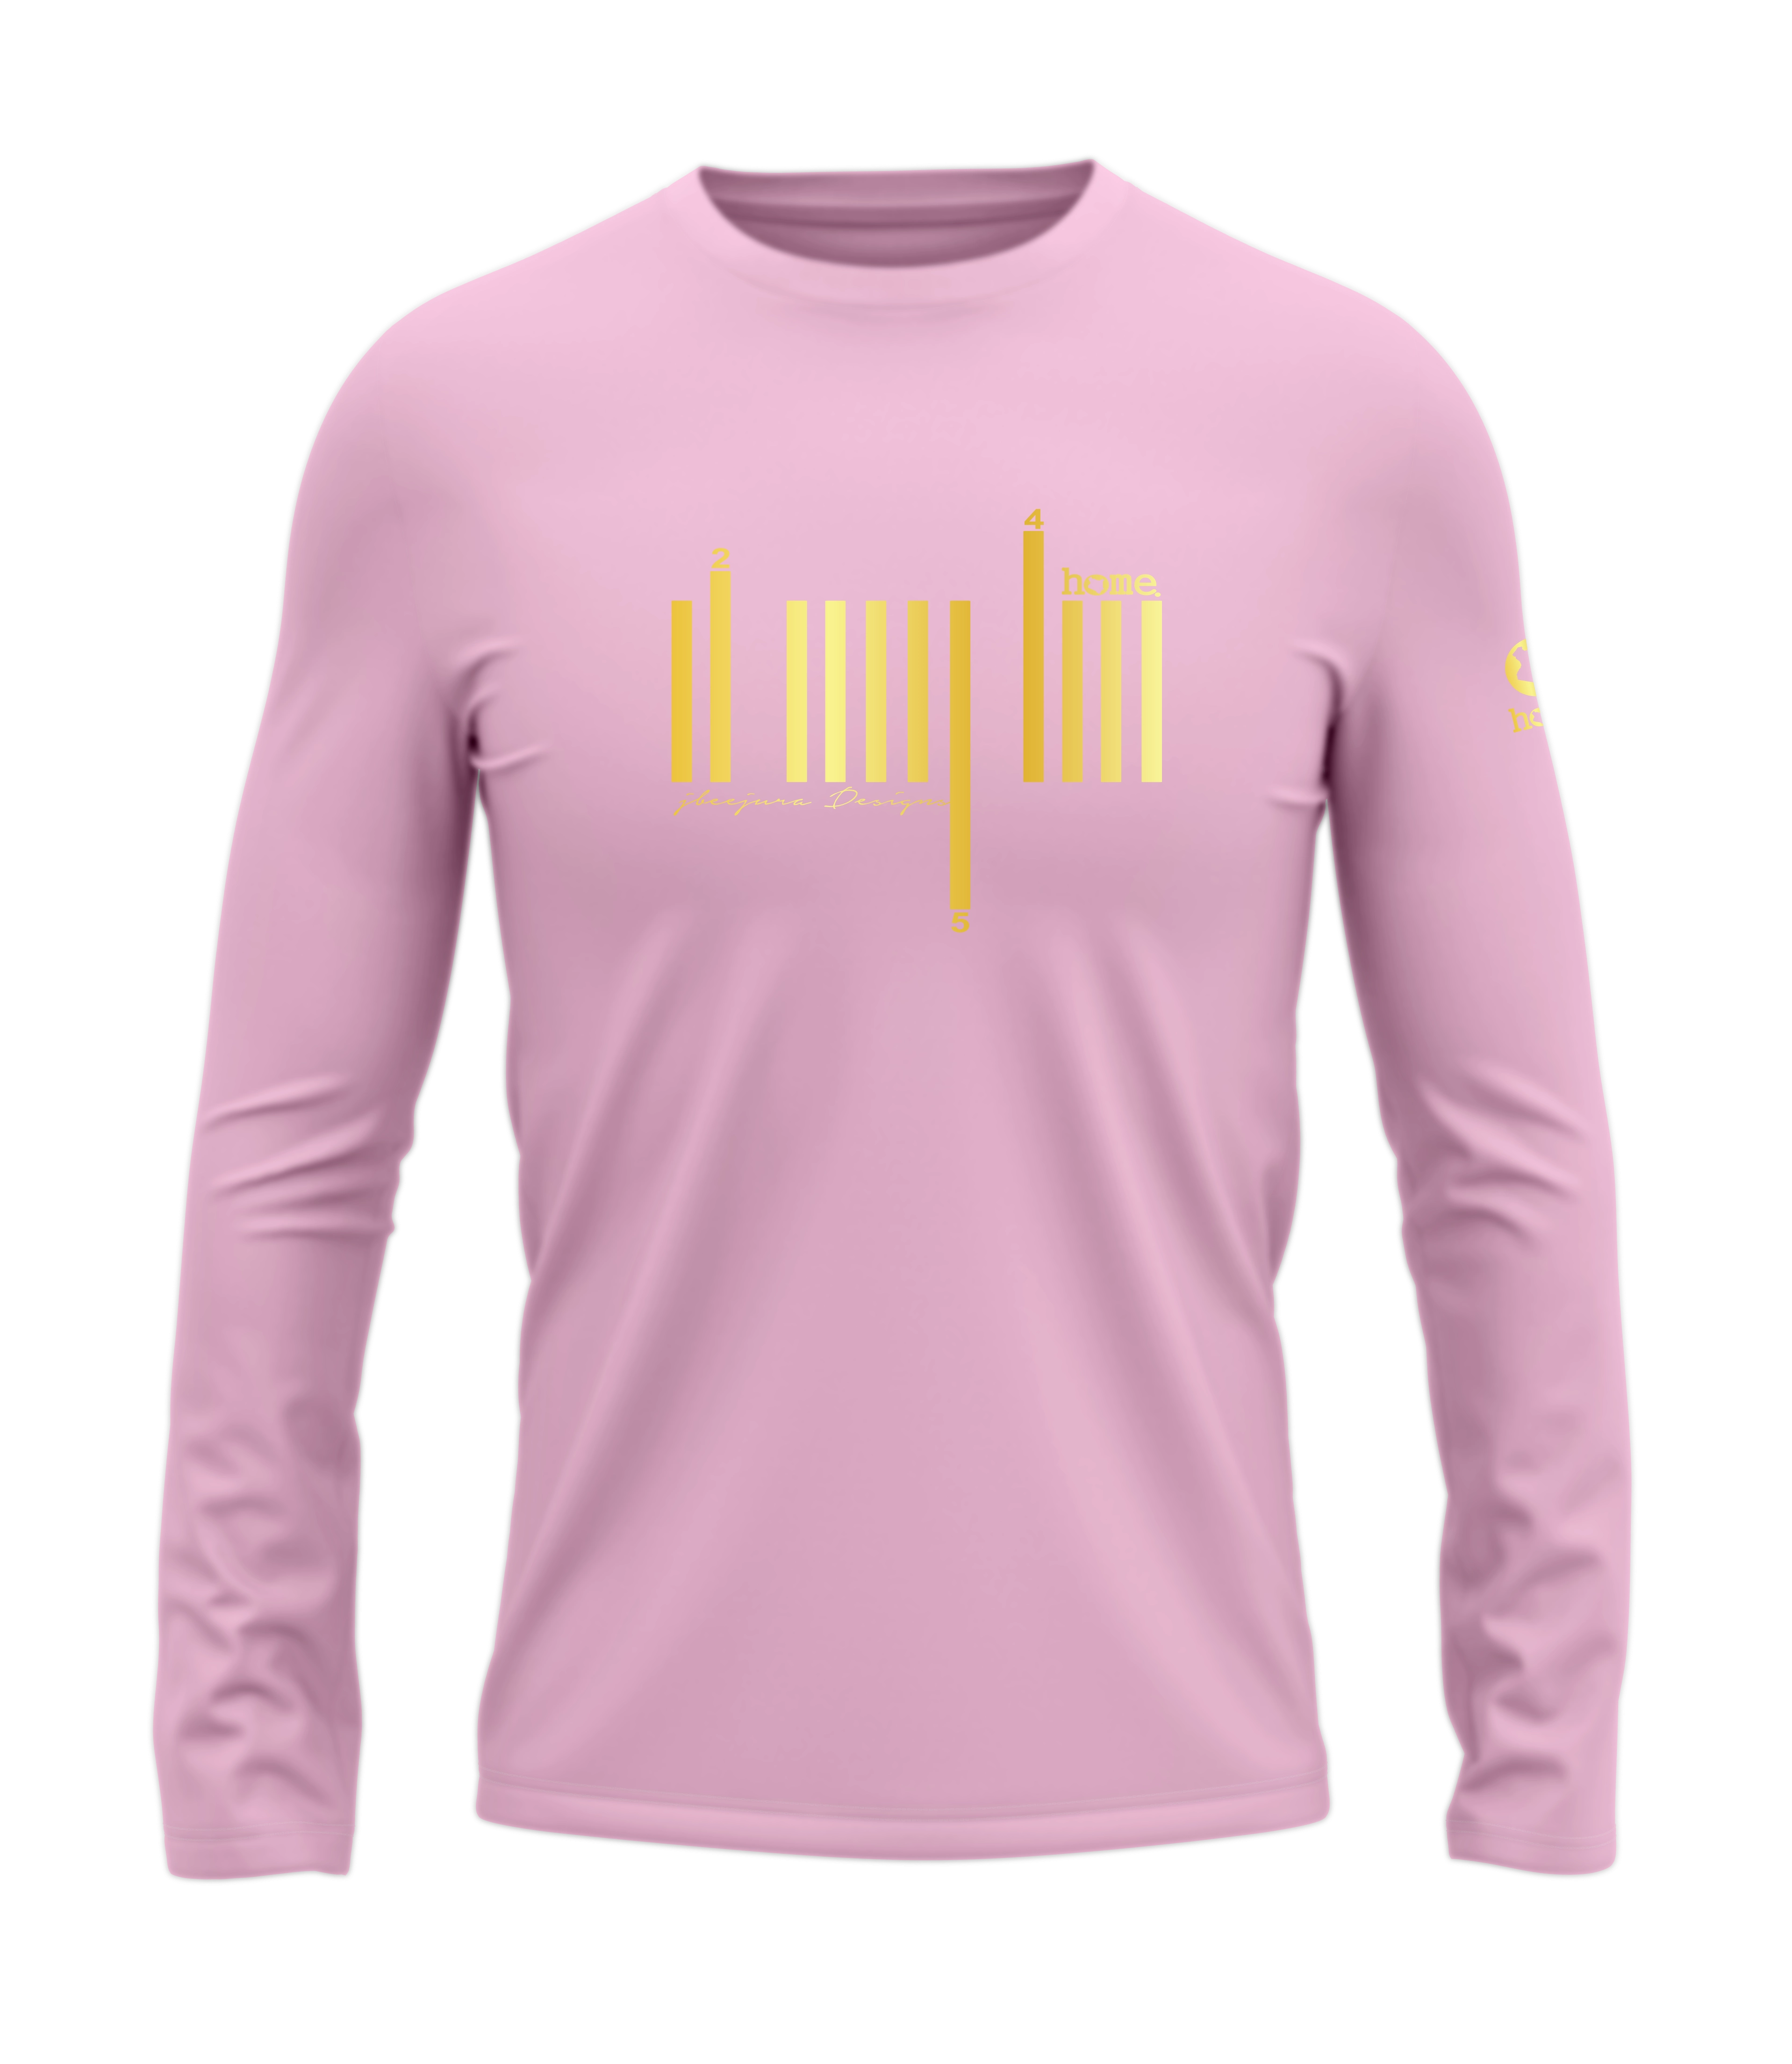 home_254 LONG-SLEEVED PINK T-SHIRT WITH A GOLD BARS PRINT – COTTON PLUS FABRIC